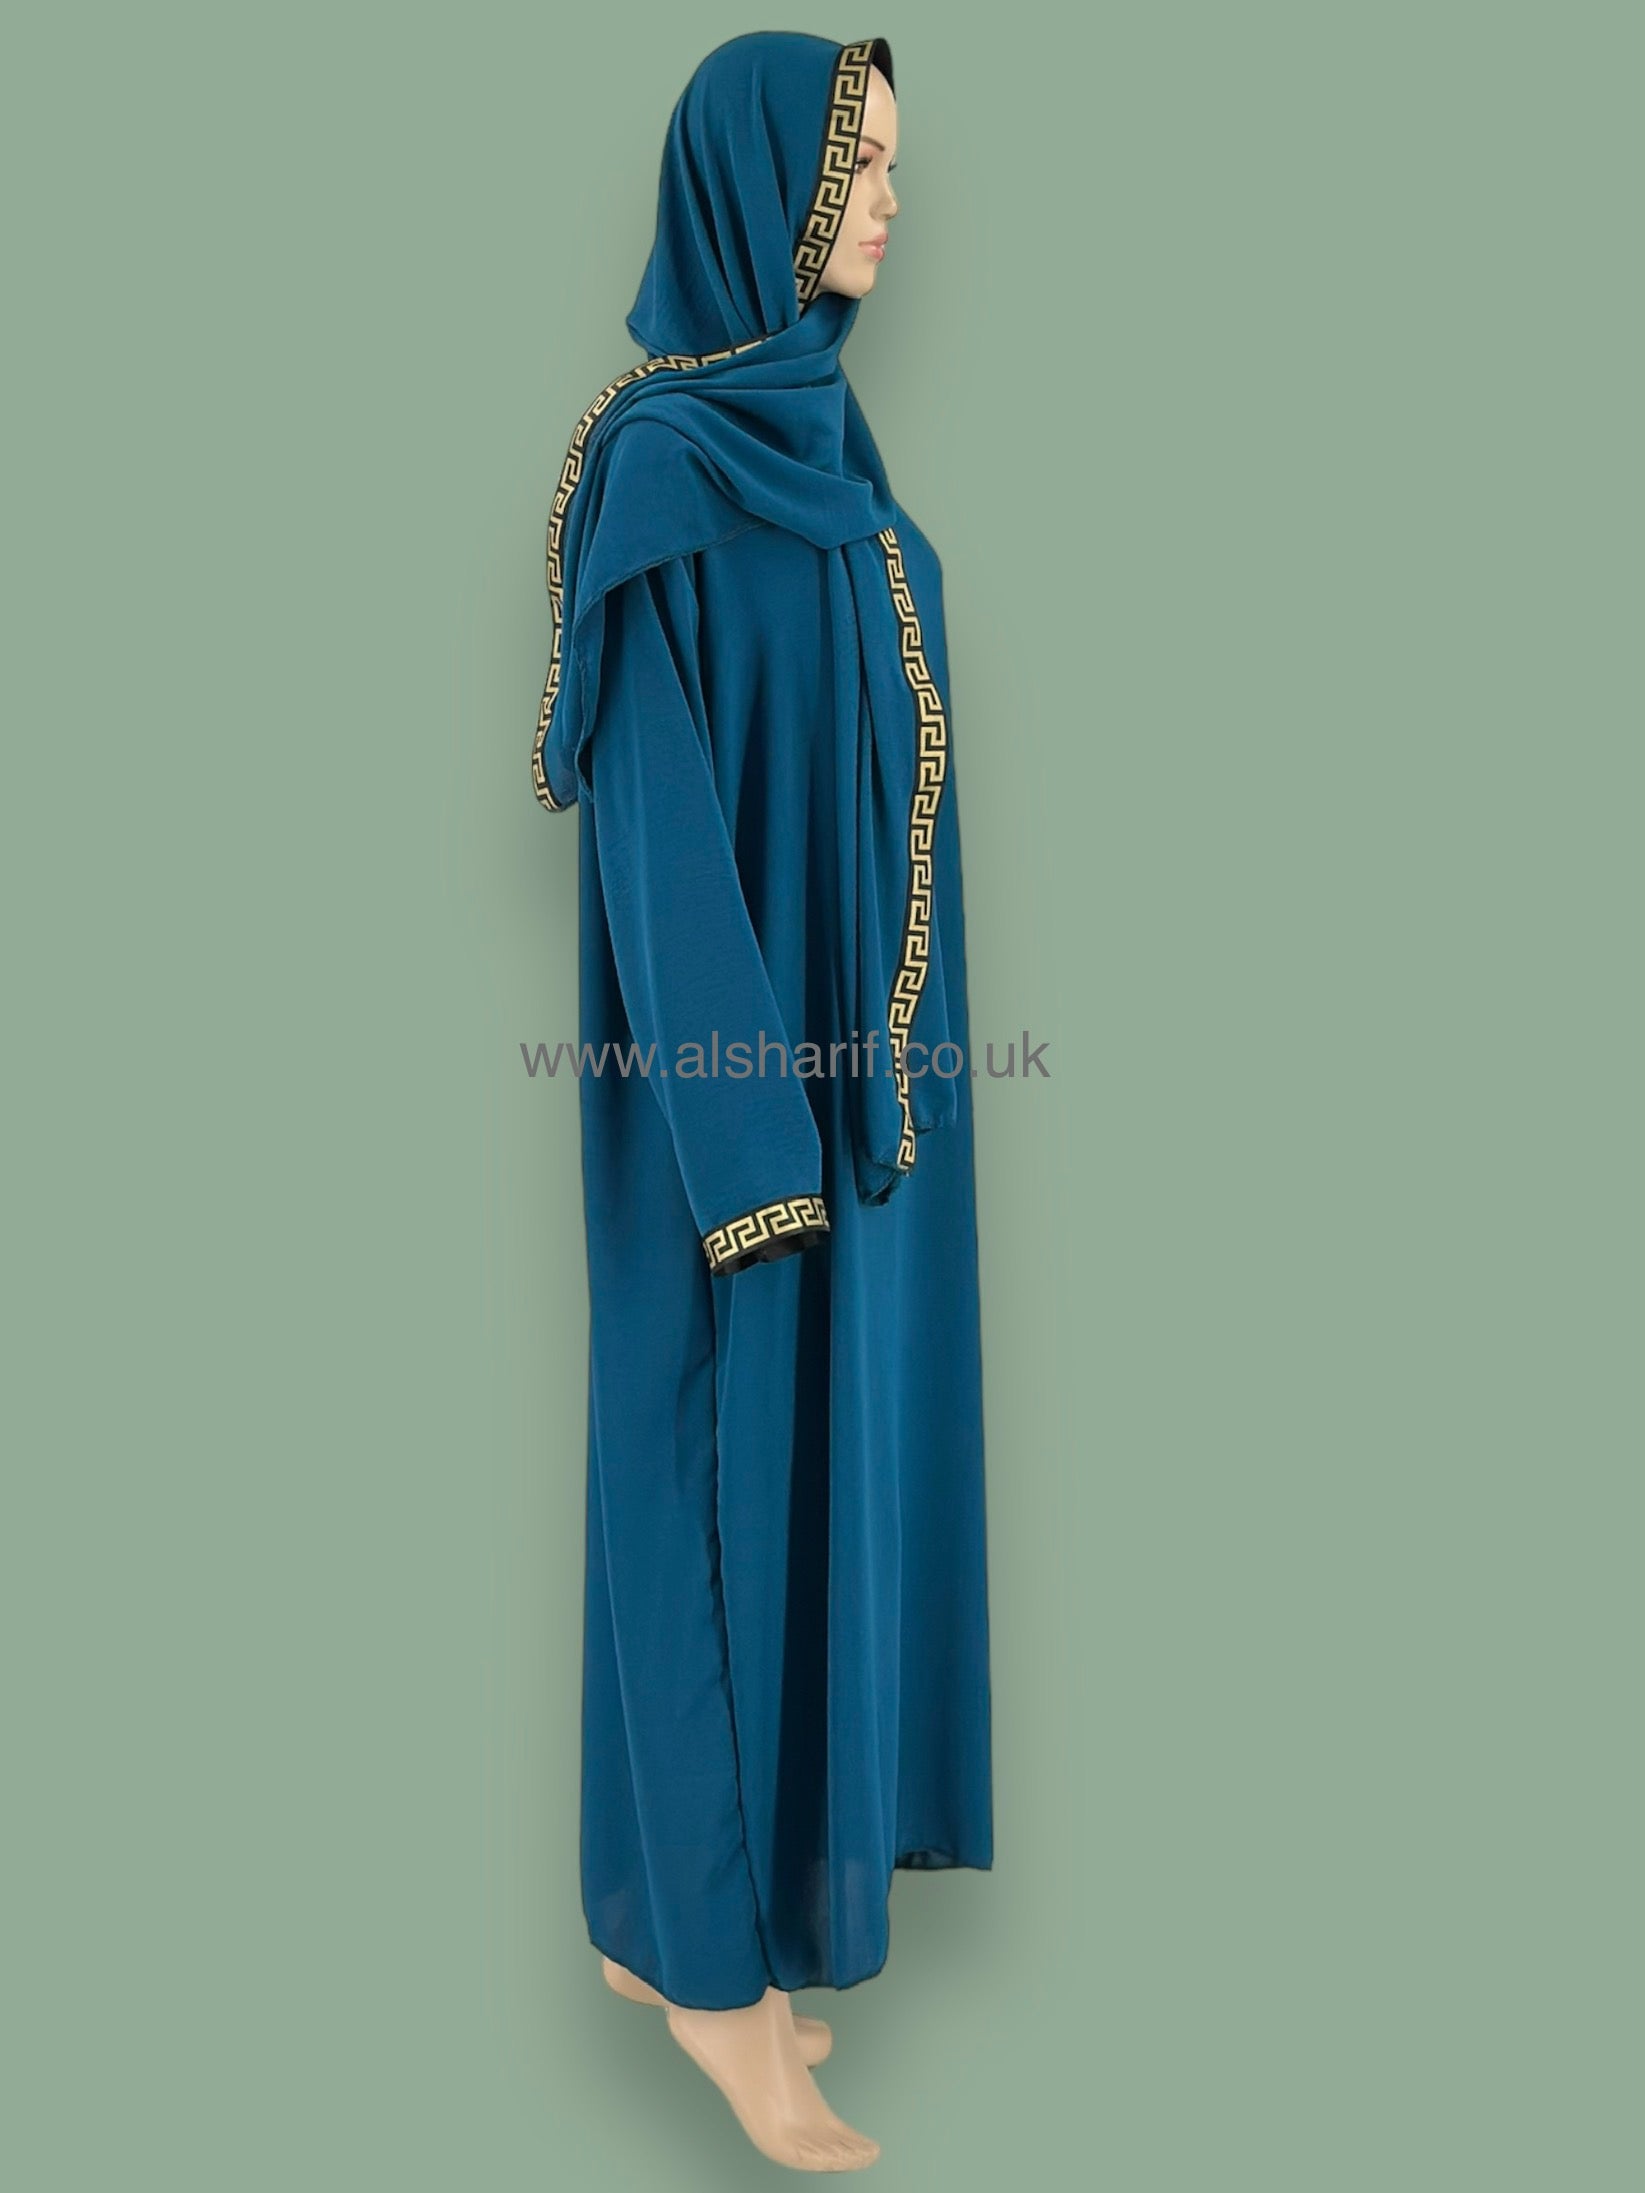 Abaya With Attached Hijab - AB122